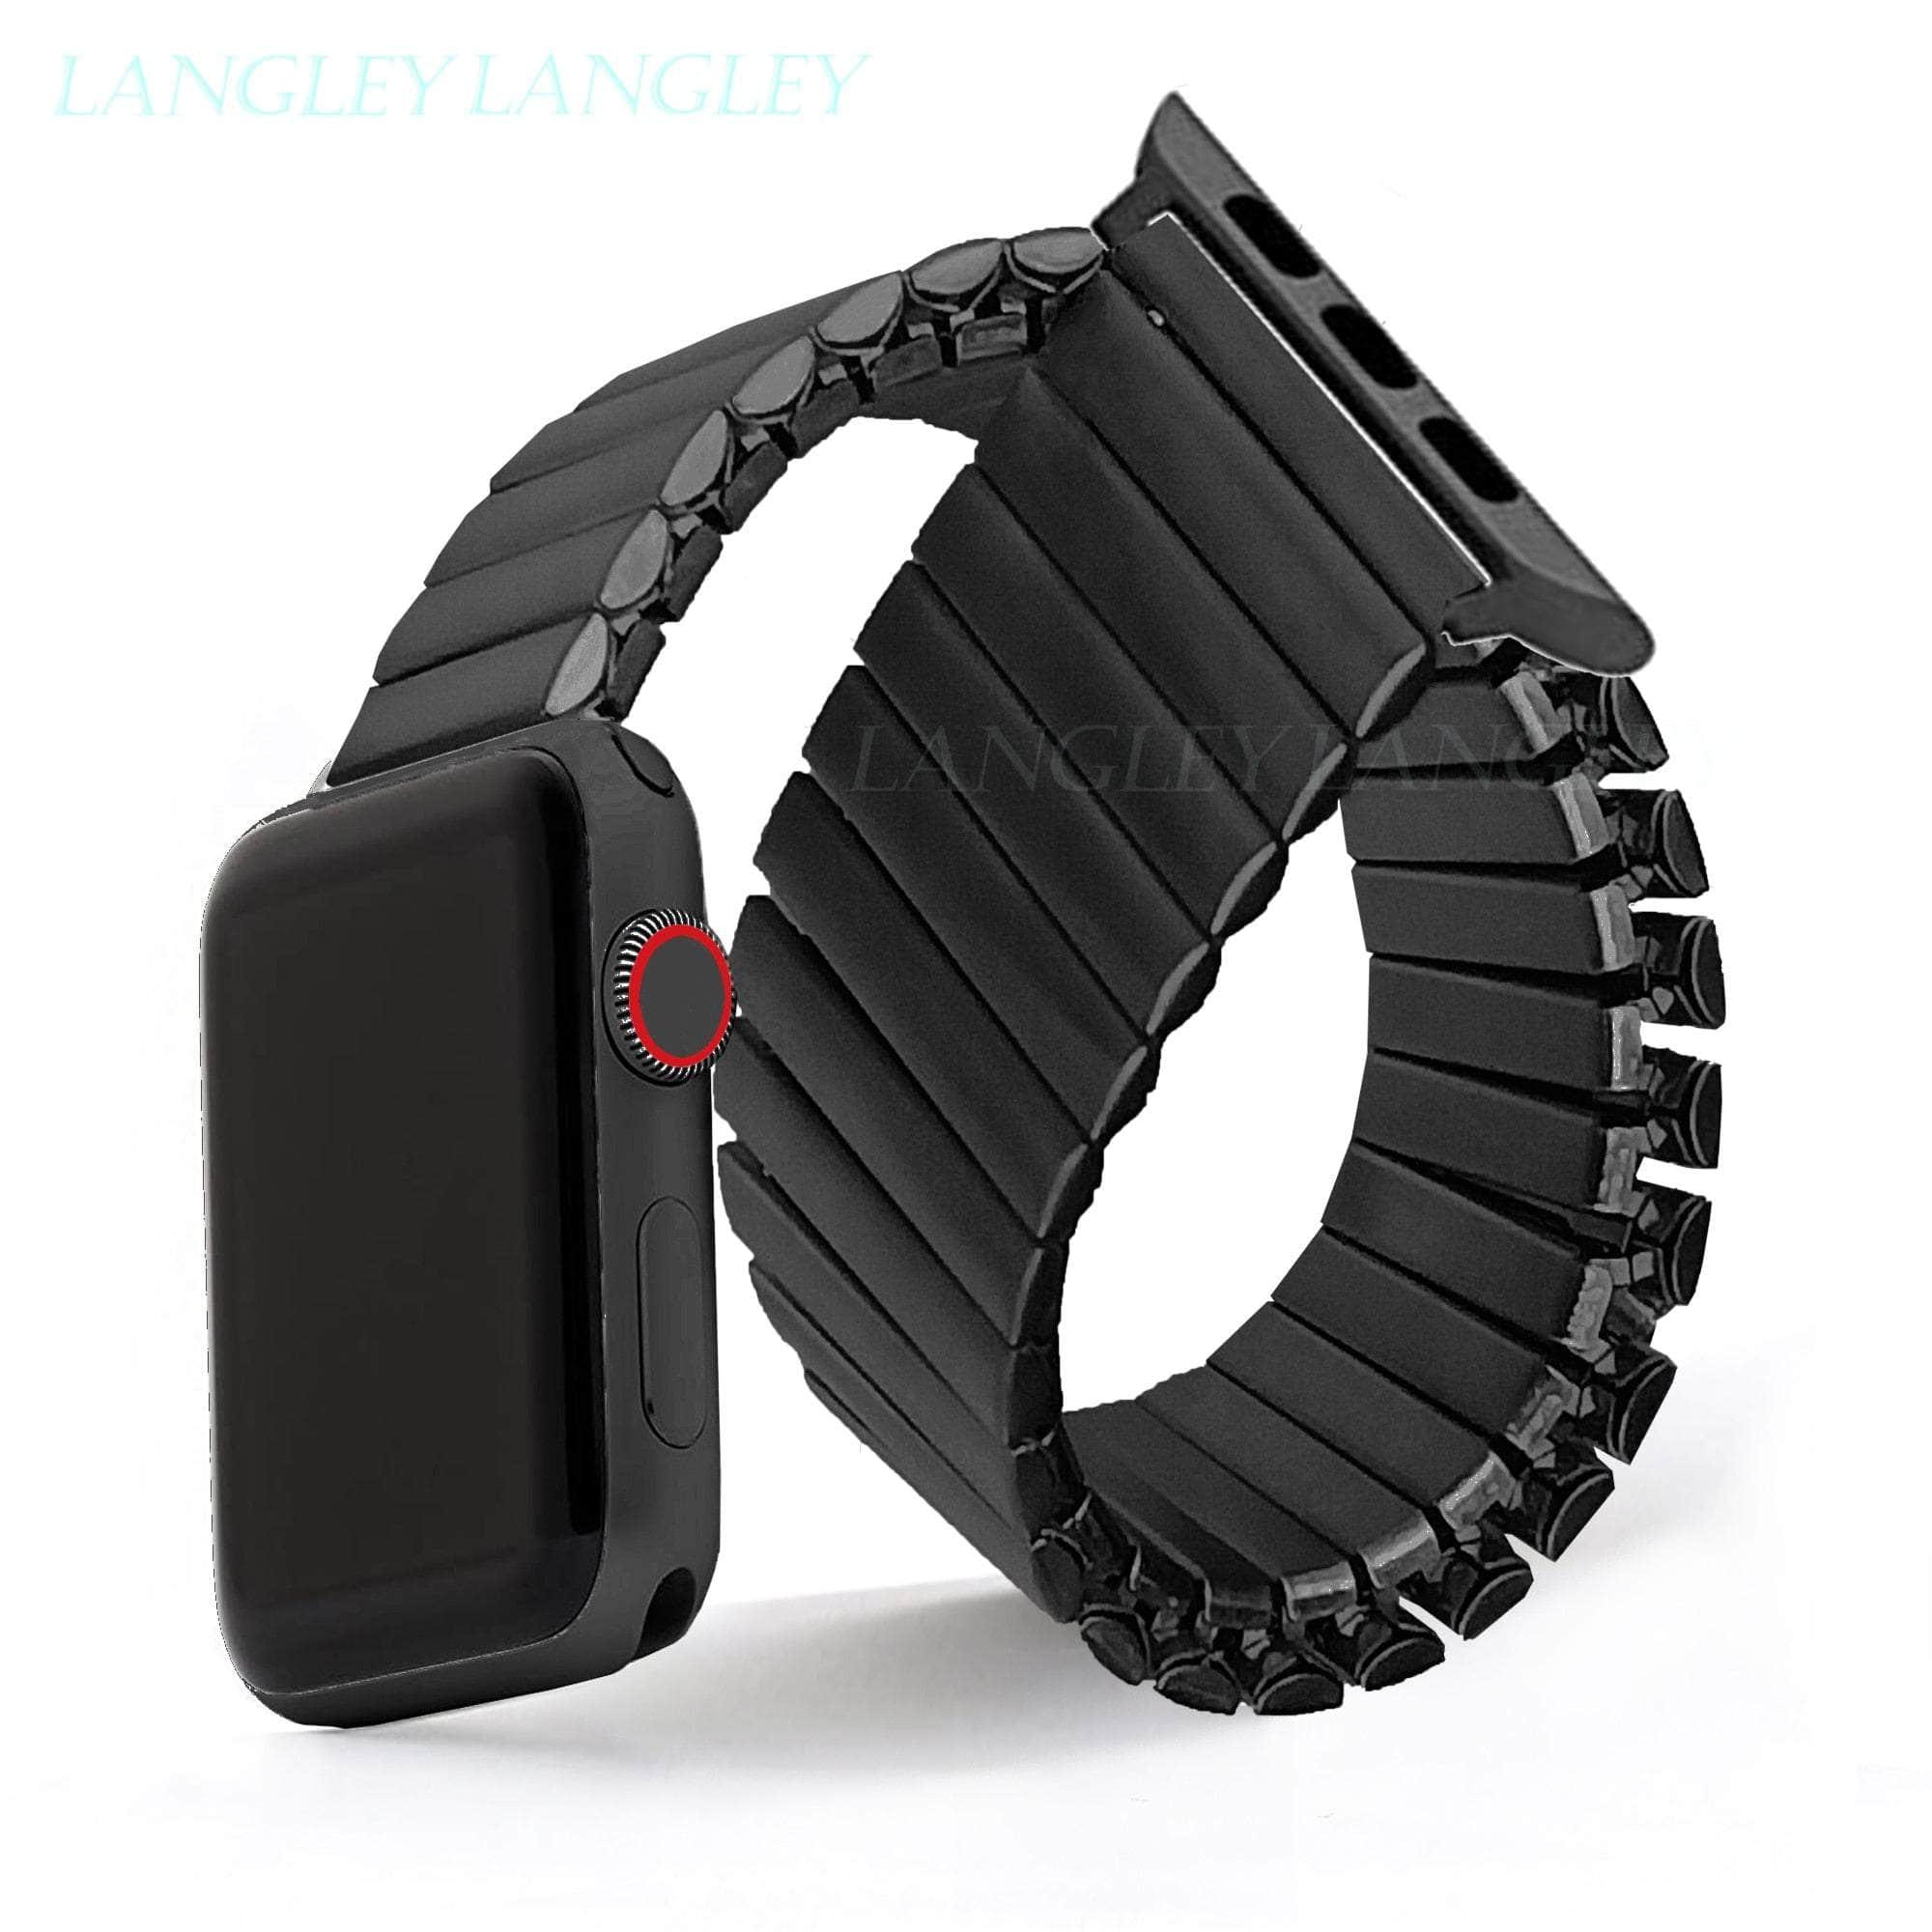 Casebuddy Elastic Stainless Steel Apple Watch Band